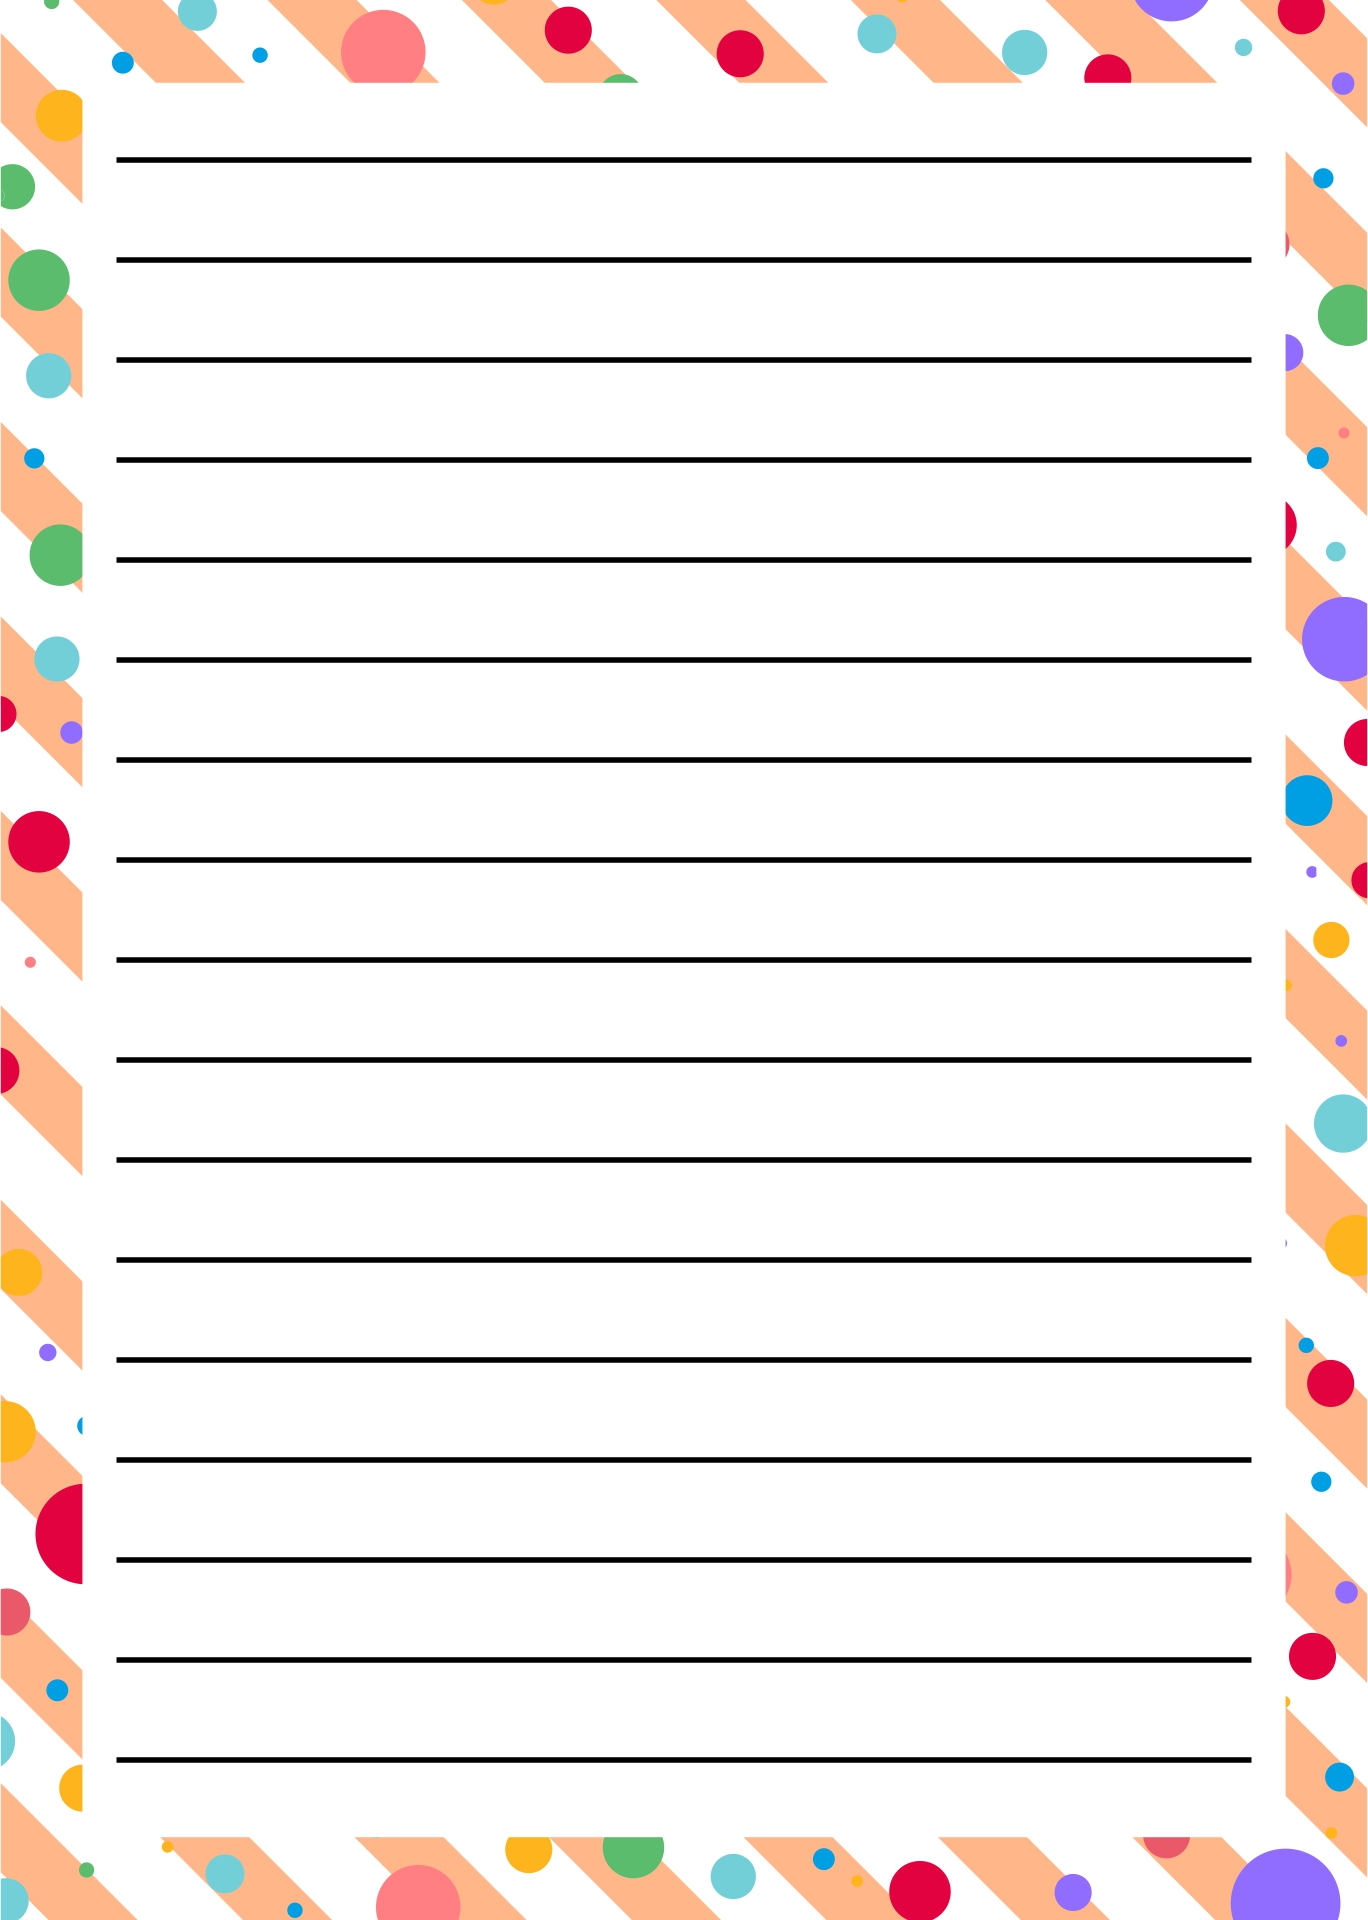 8 Best Images of Printable Christmas Lined Paper With Borders